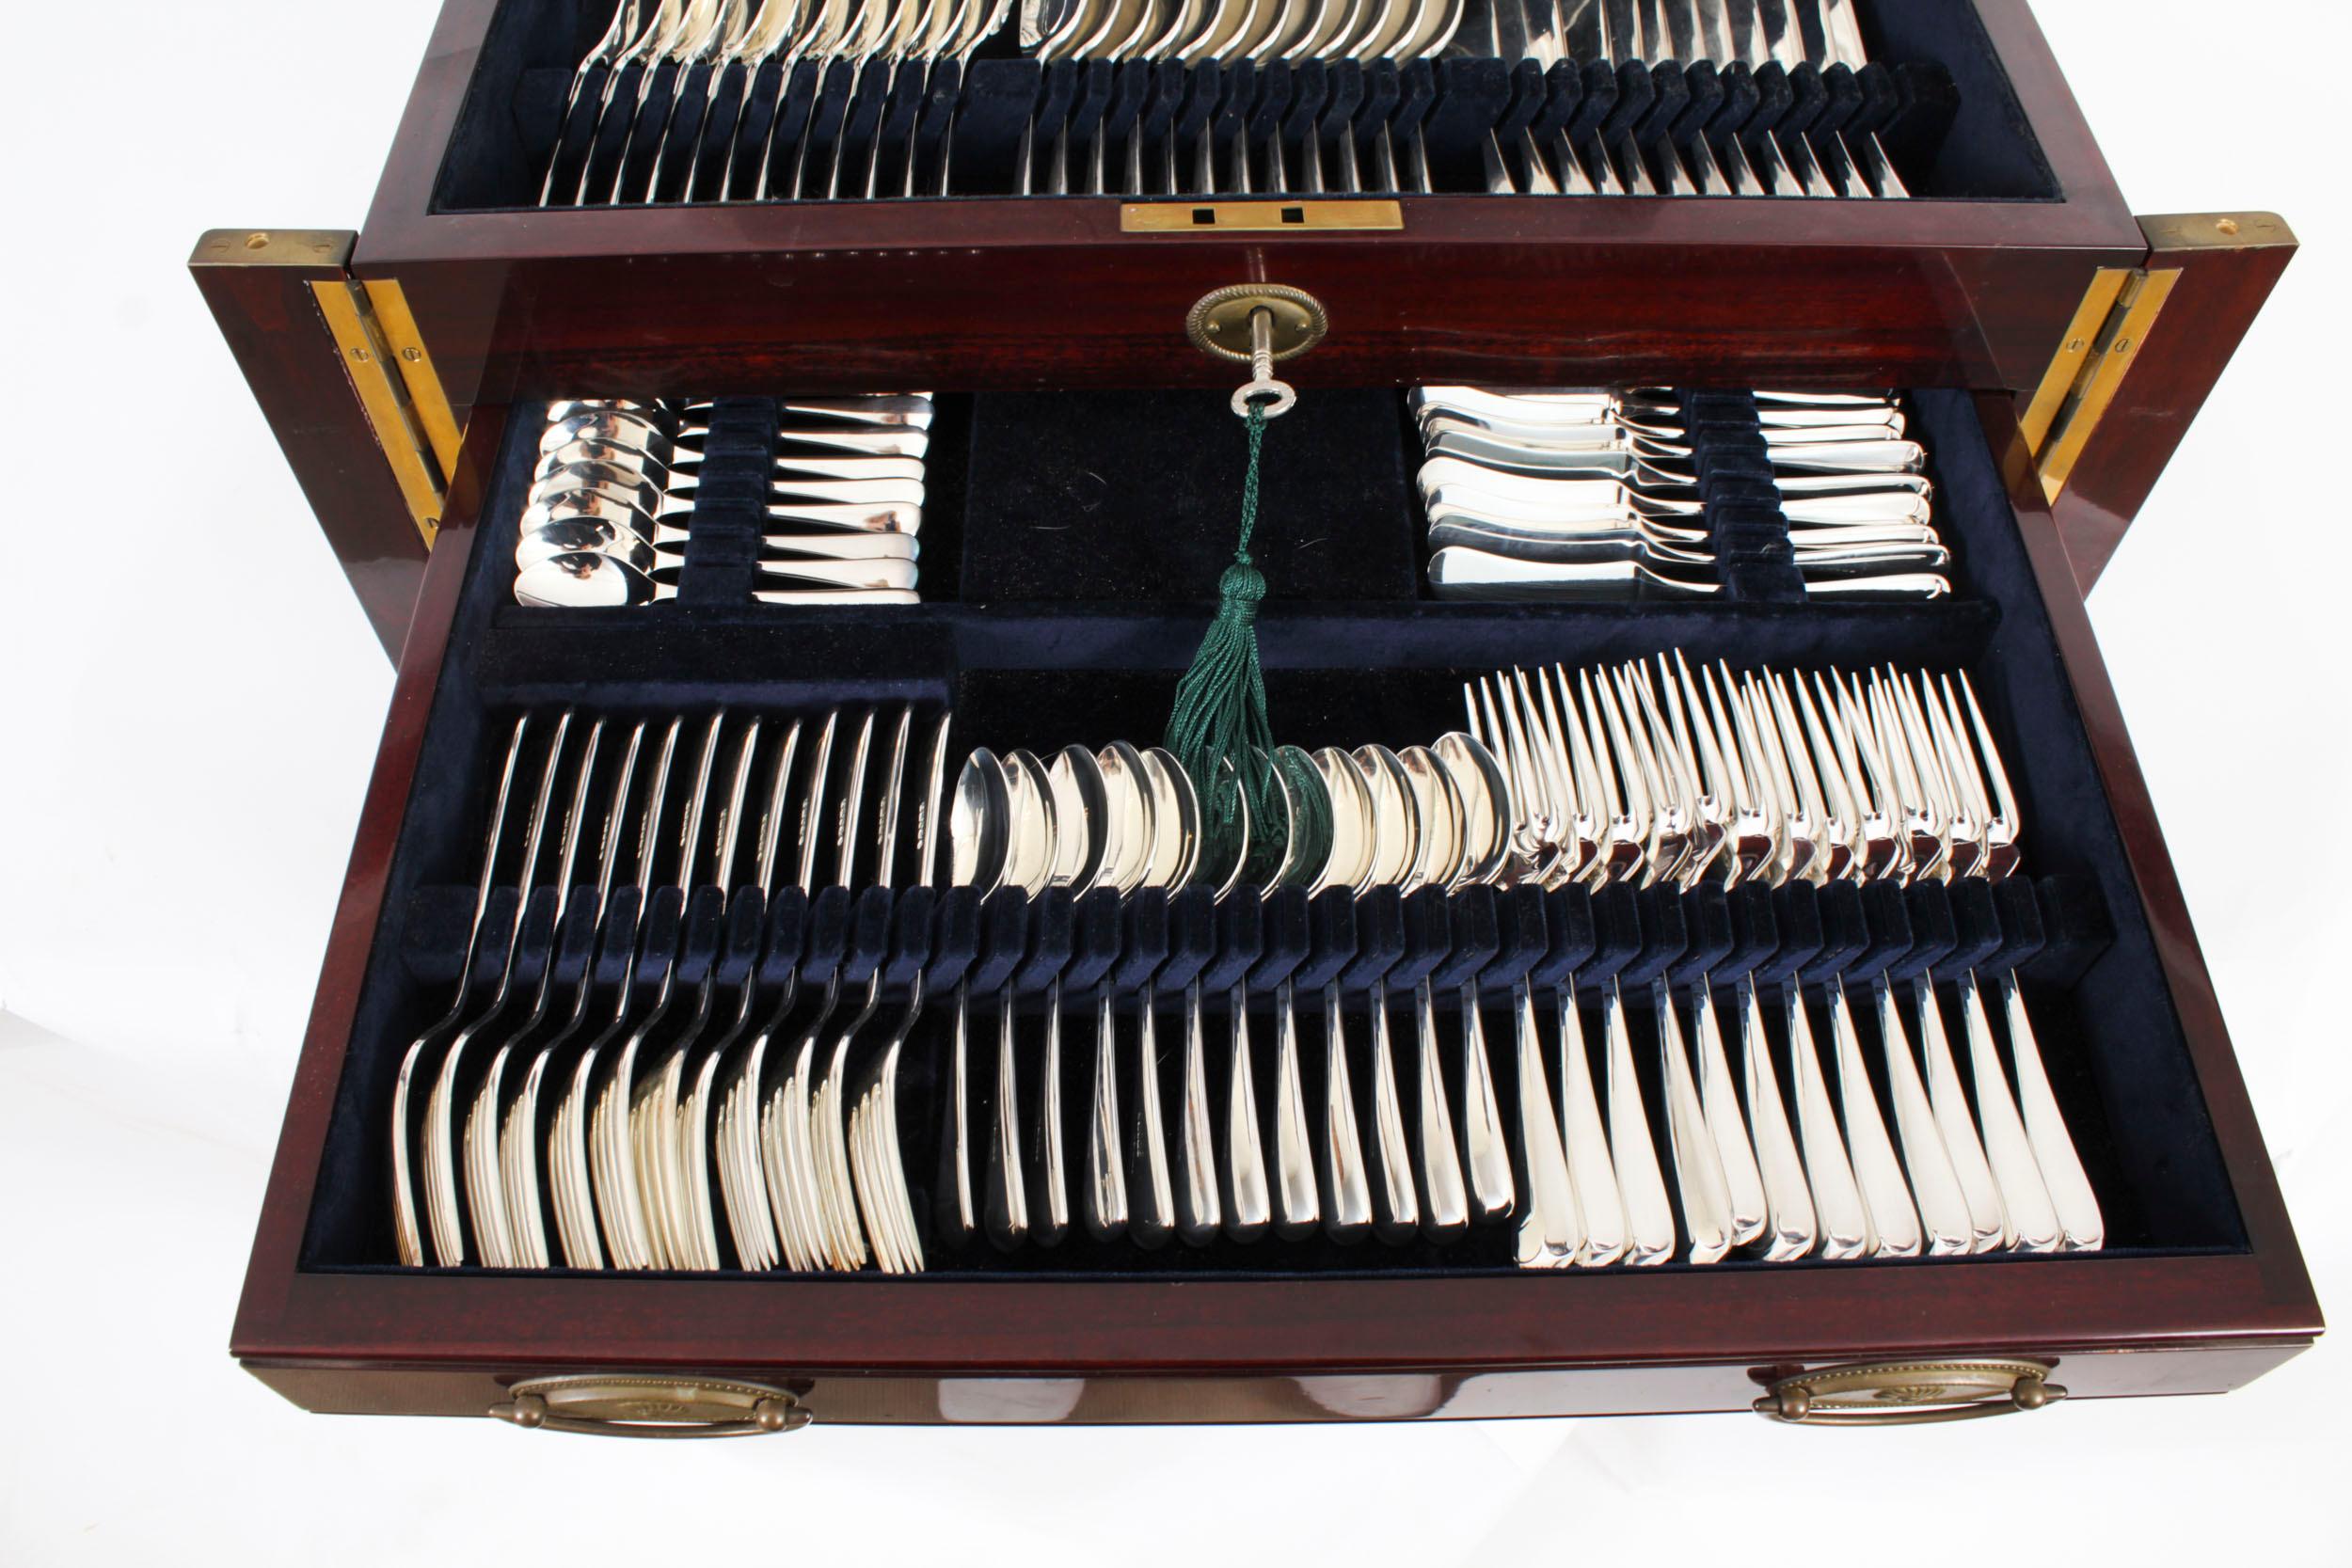 Vintage150 Piece Canteen-12 Place Sterling Silver Cutlery Set by Carrs 2004 For Sale 3